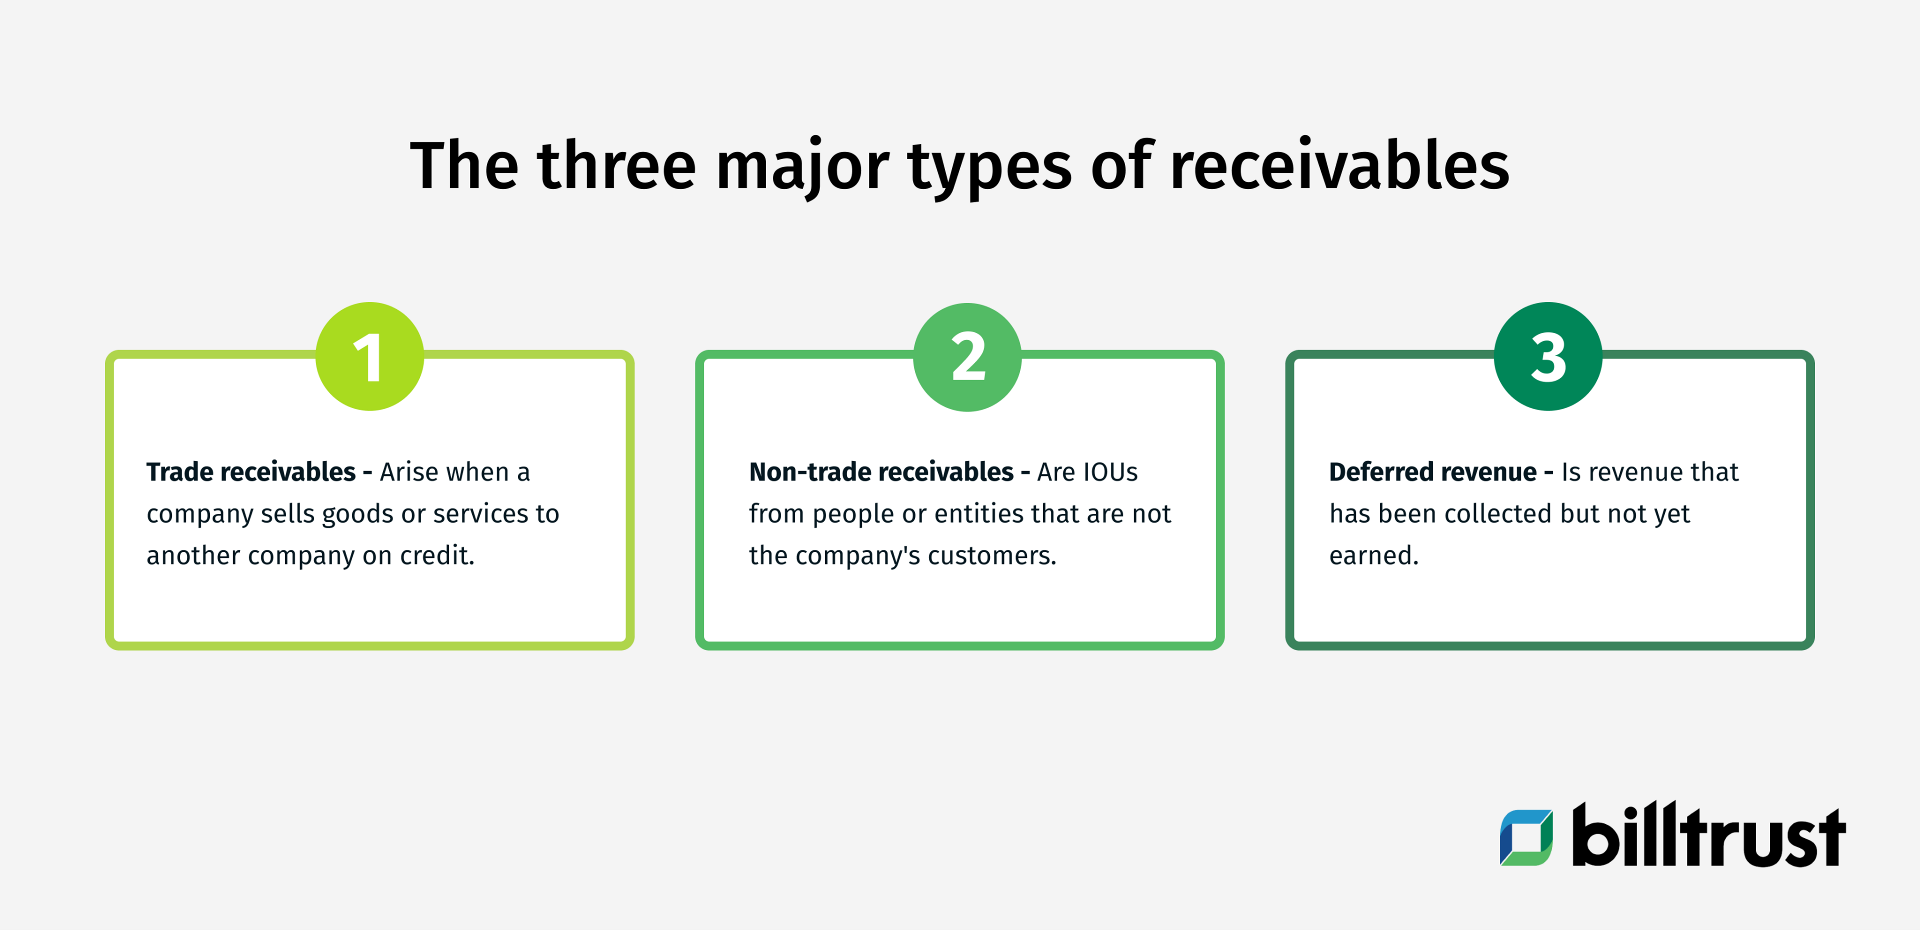 the three major types of receivables: trade, non-trade and deferred revenue